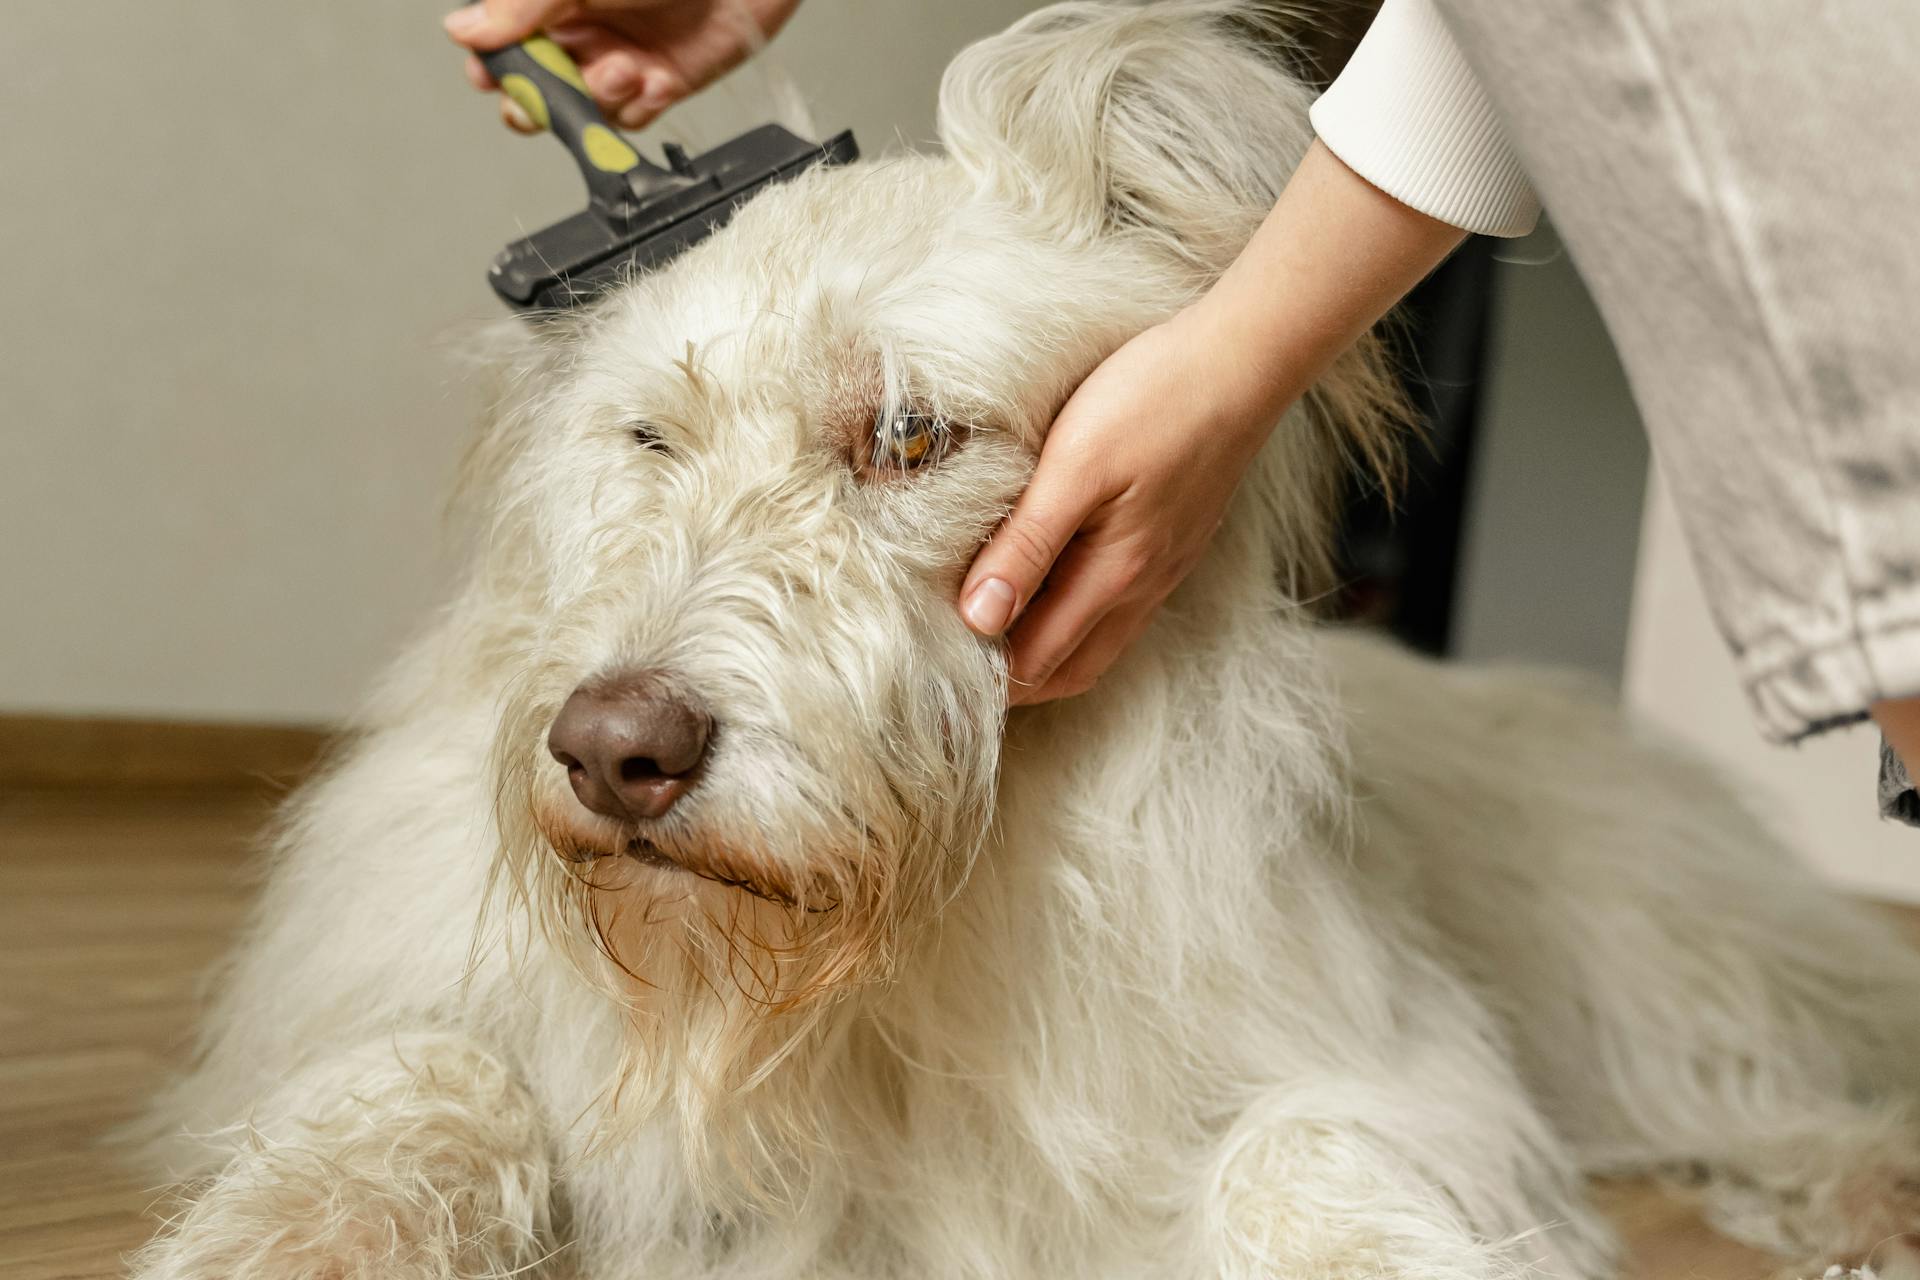 A person brushing her dog's fur